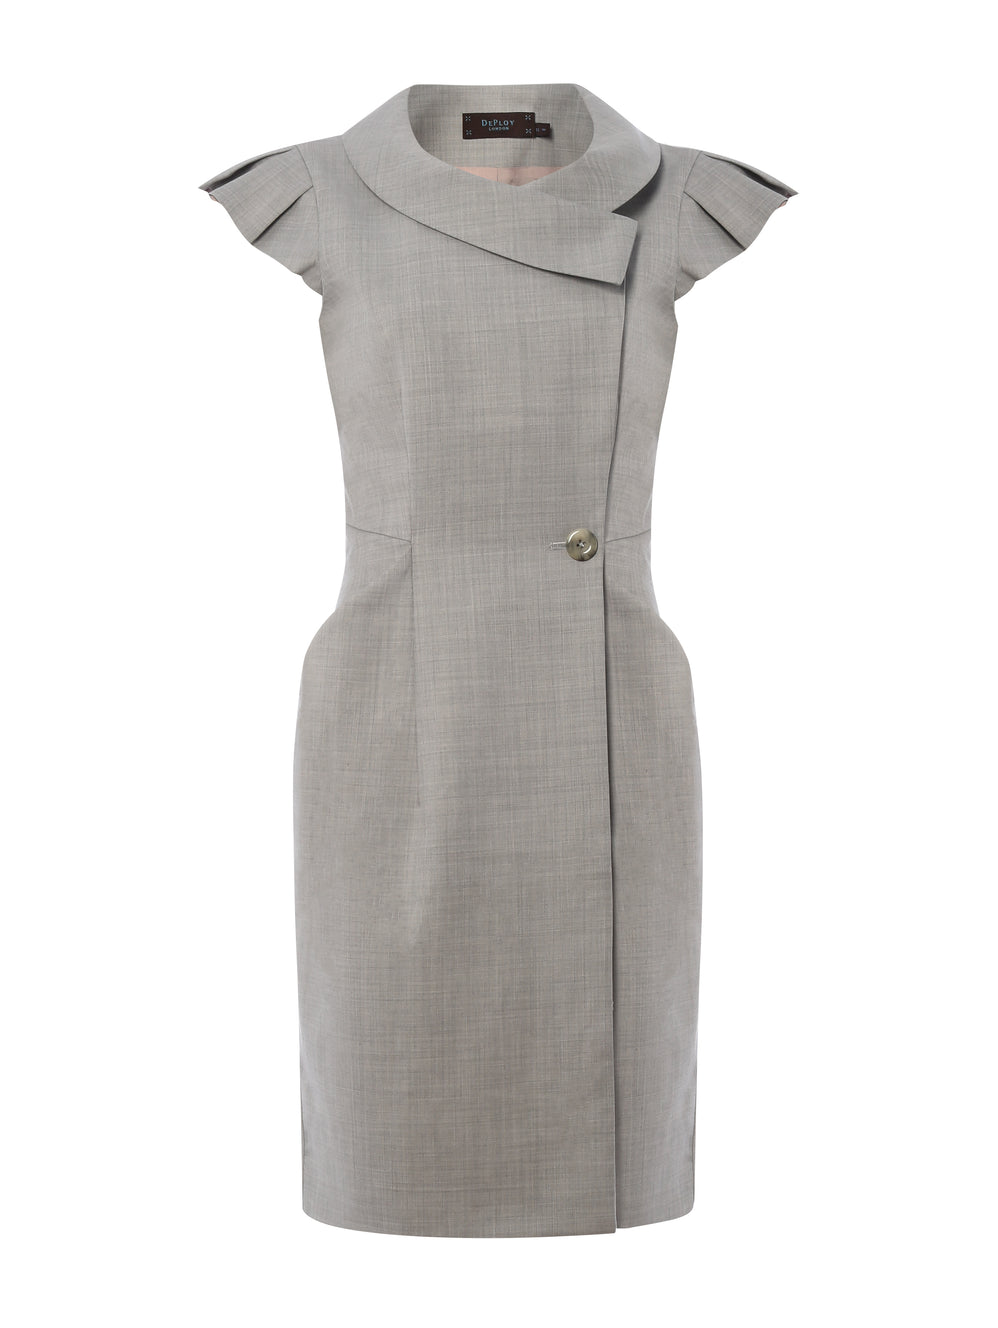 D064 _ ARCHITRAVE _ Tailored Wrap Dress_Alabaster Grey